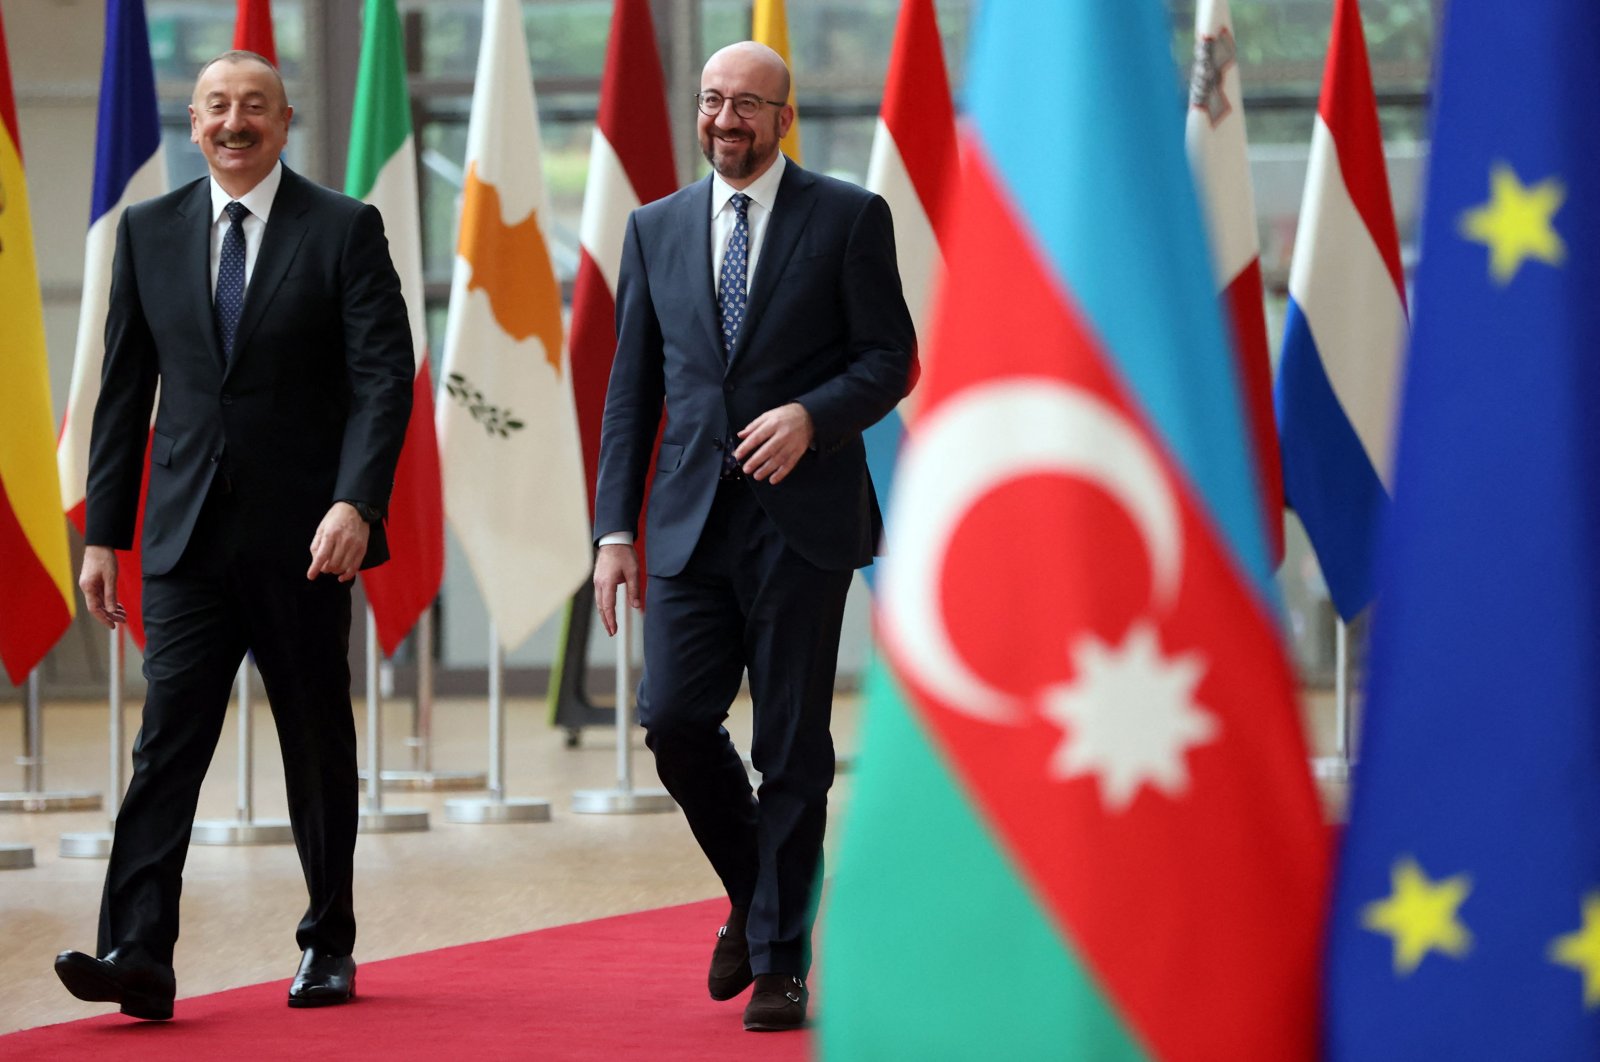 European Council President Charles Michel (R) walks with Azerbaijan President Ilham Aliyev as they arrive for a meeting at the European Council in Brussels, Belgium, April 6, 2022. (AFP Photo)